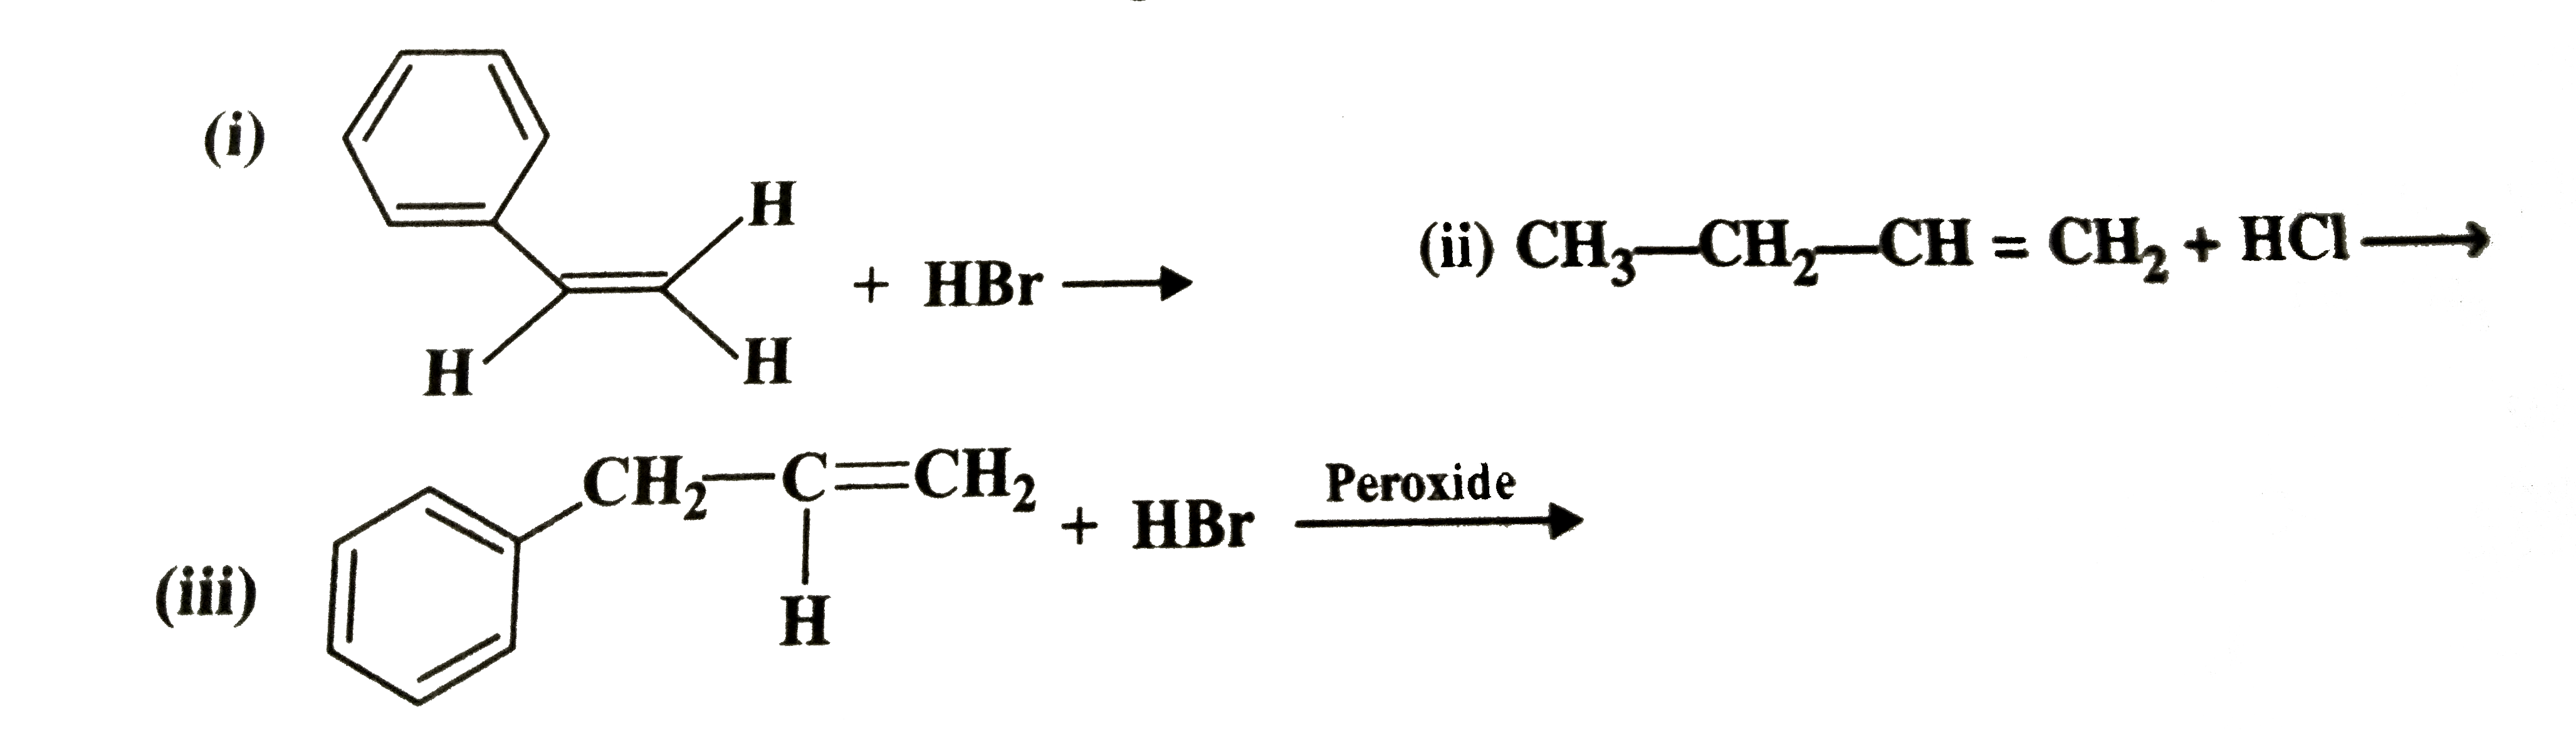 Write the products of the following reactions: